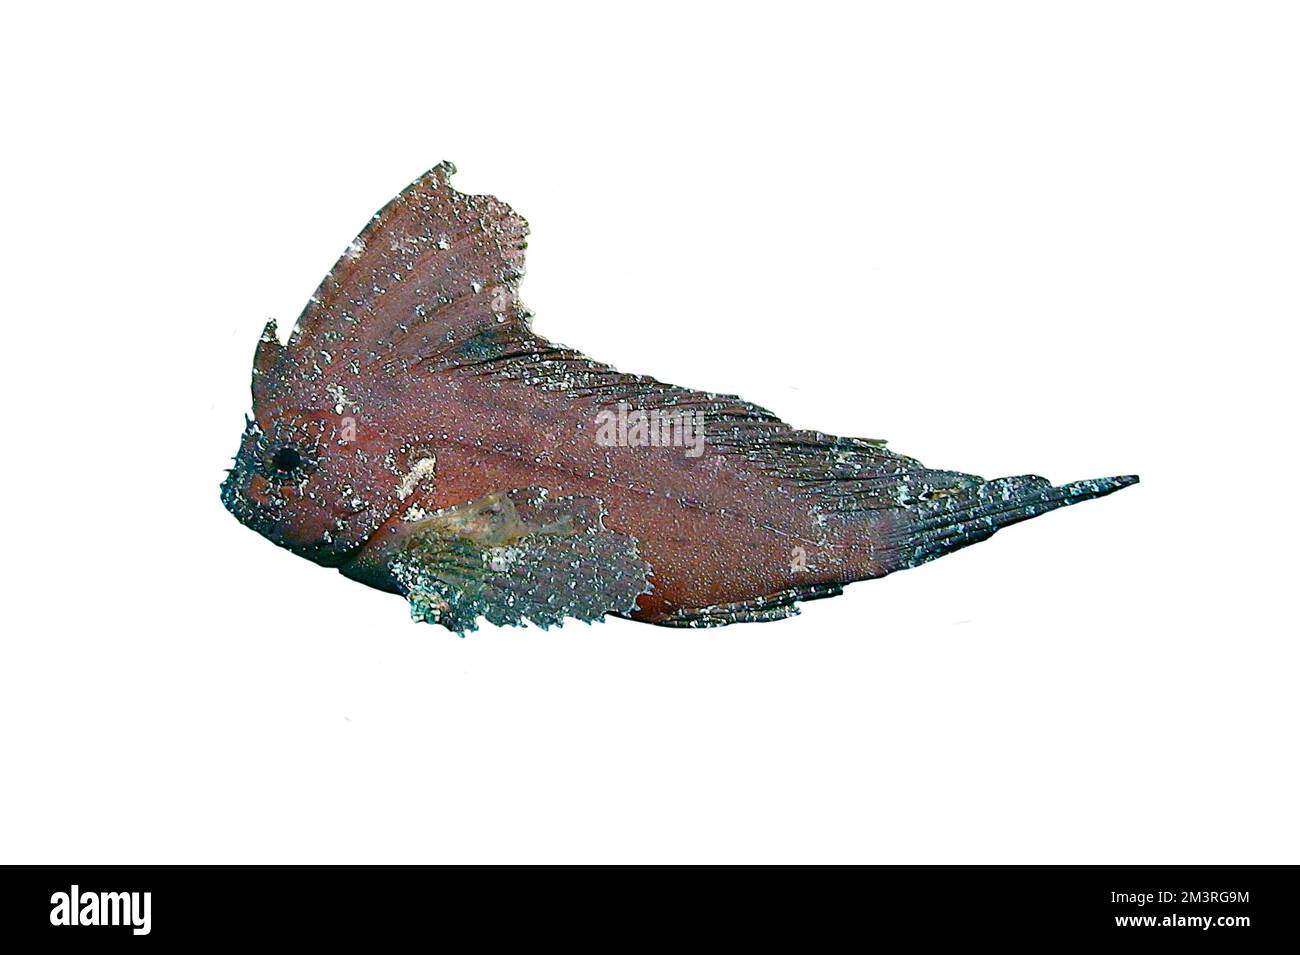 Cockatoo waspfish (Ablabys taenianotus), exempted, dragonhead relatives, coral reef, Indo-Pacific, white background Stock Photo